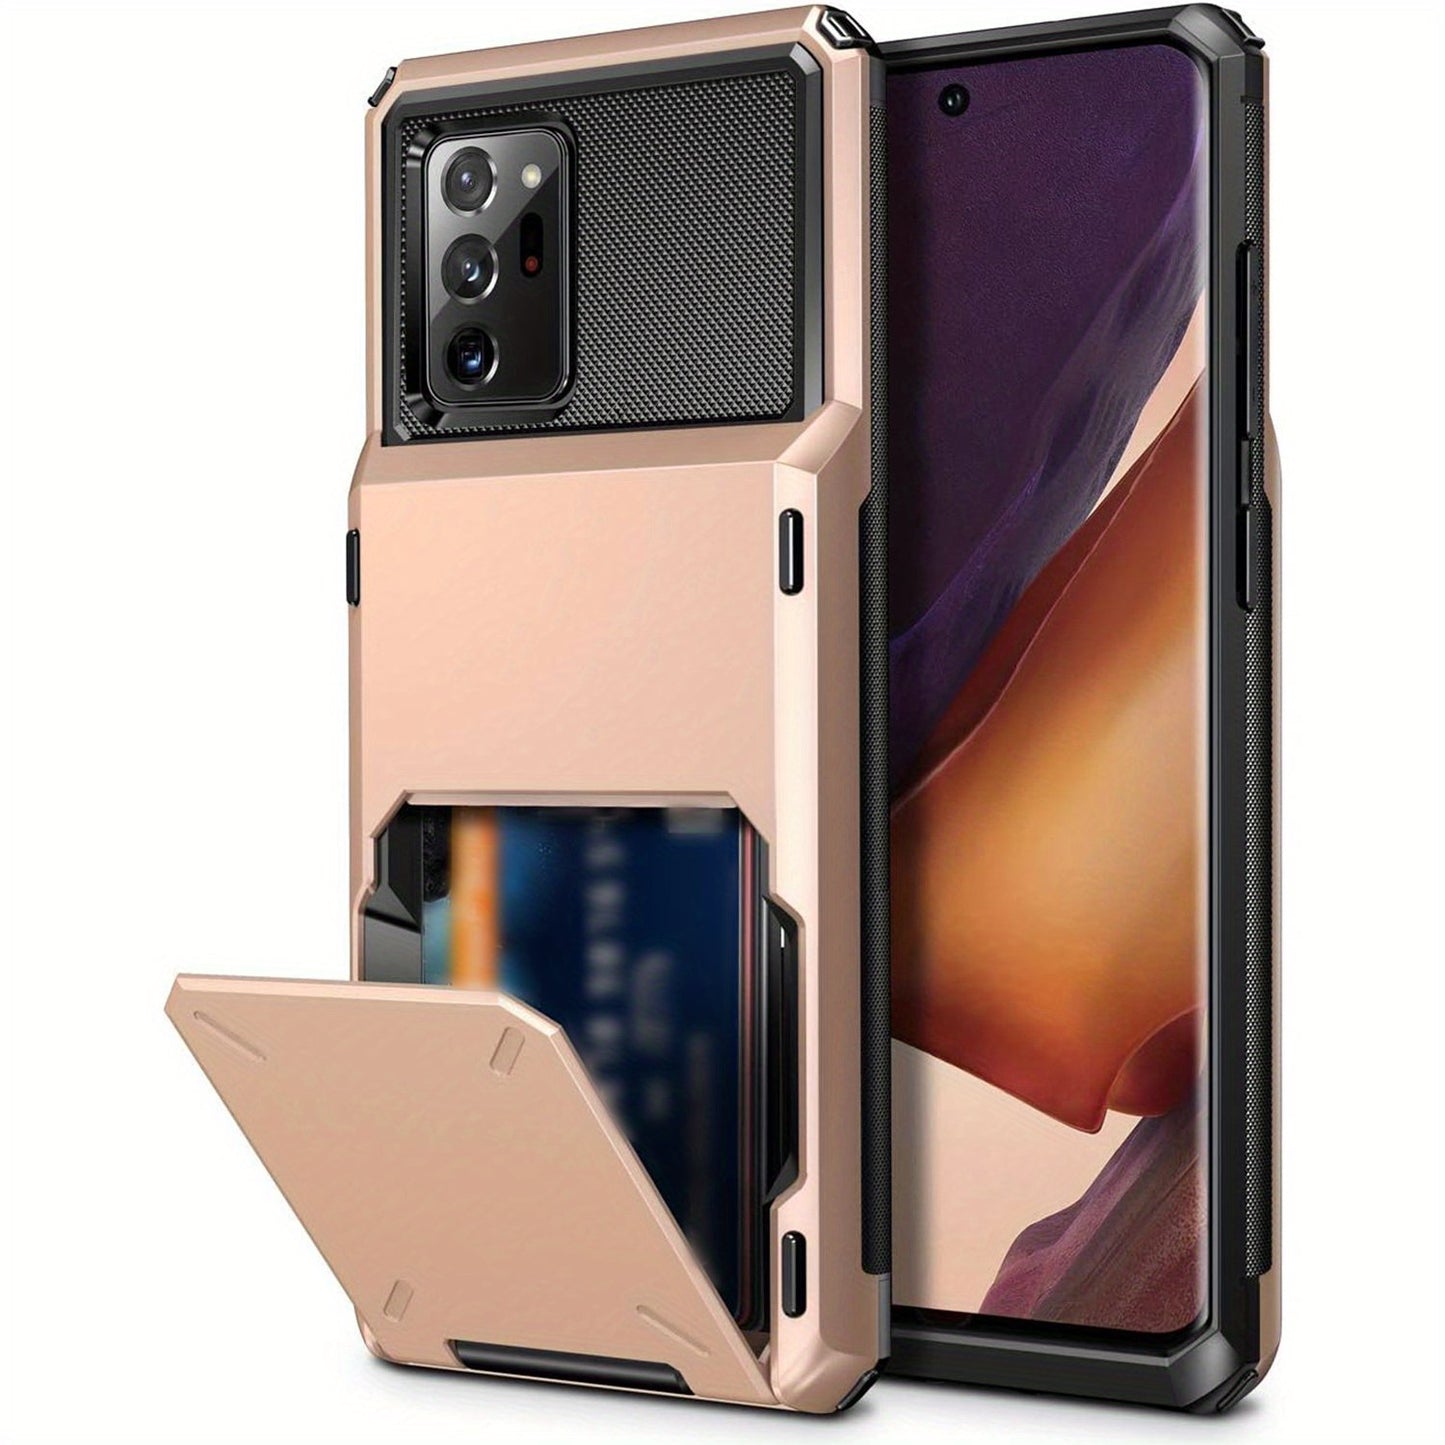 For Samsung Galaxy Note 20 Ultra Note 8/9 Note 10 Pro Case 5G Wallet 4-Card Flip Cover Credit Card Holder Slot Back Pocket Dual Layer Protective Hybrid Hard Shell Bumper Armor Case